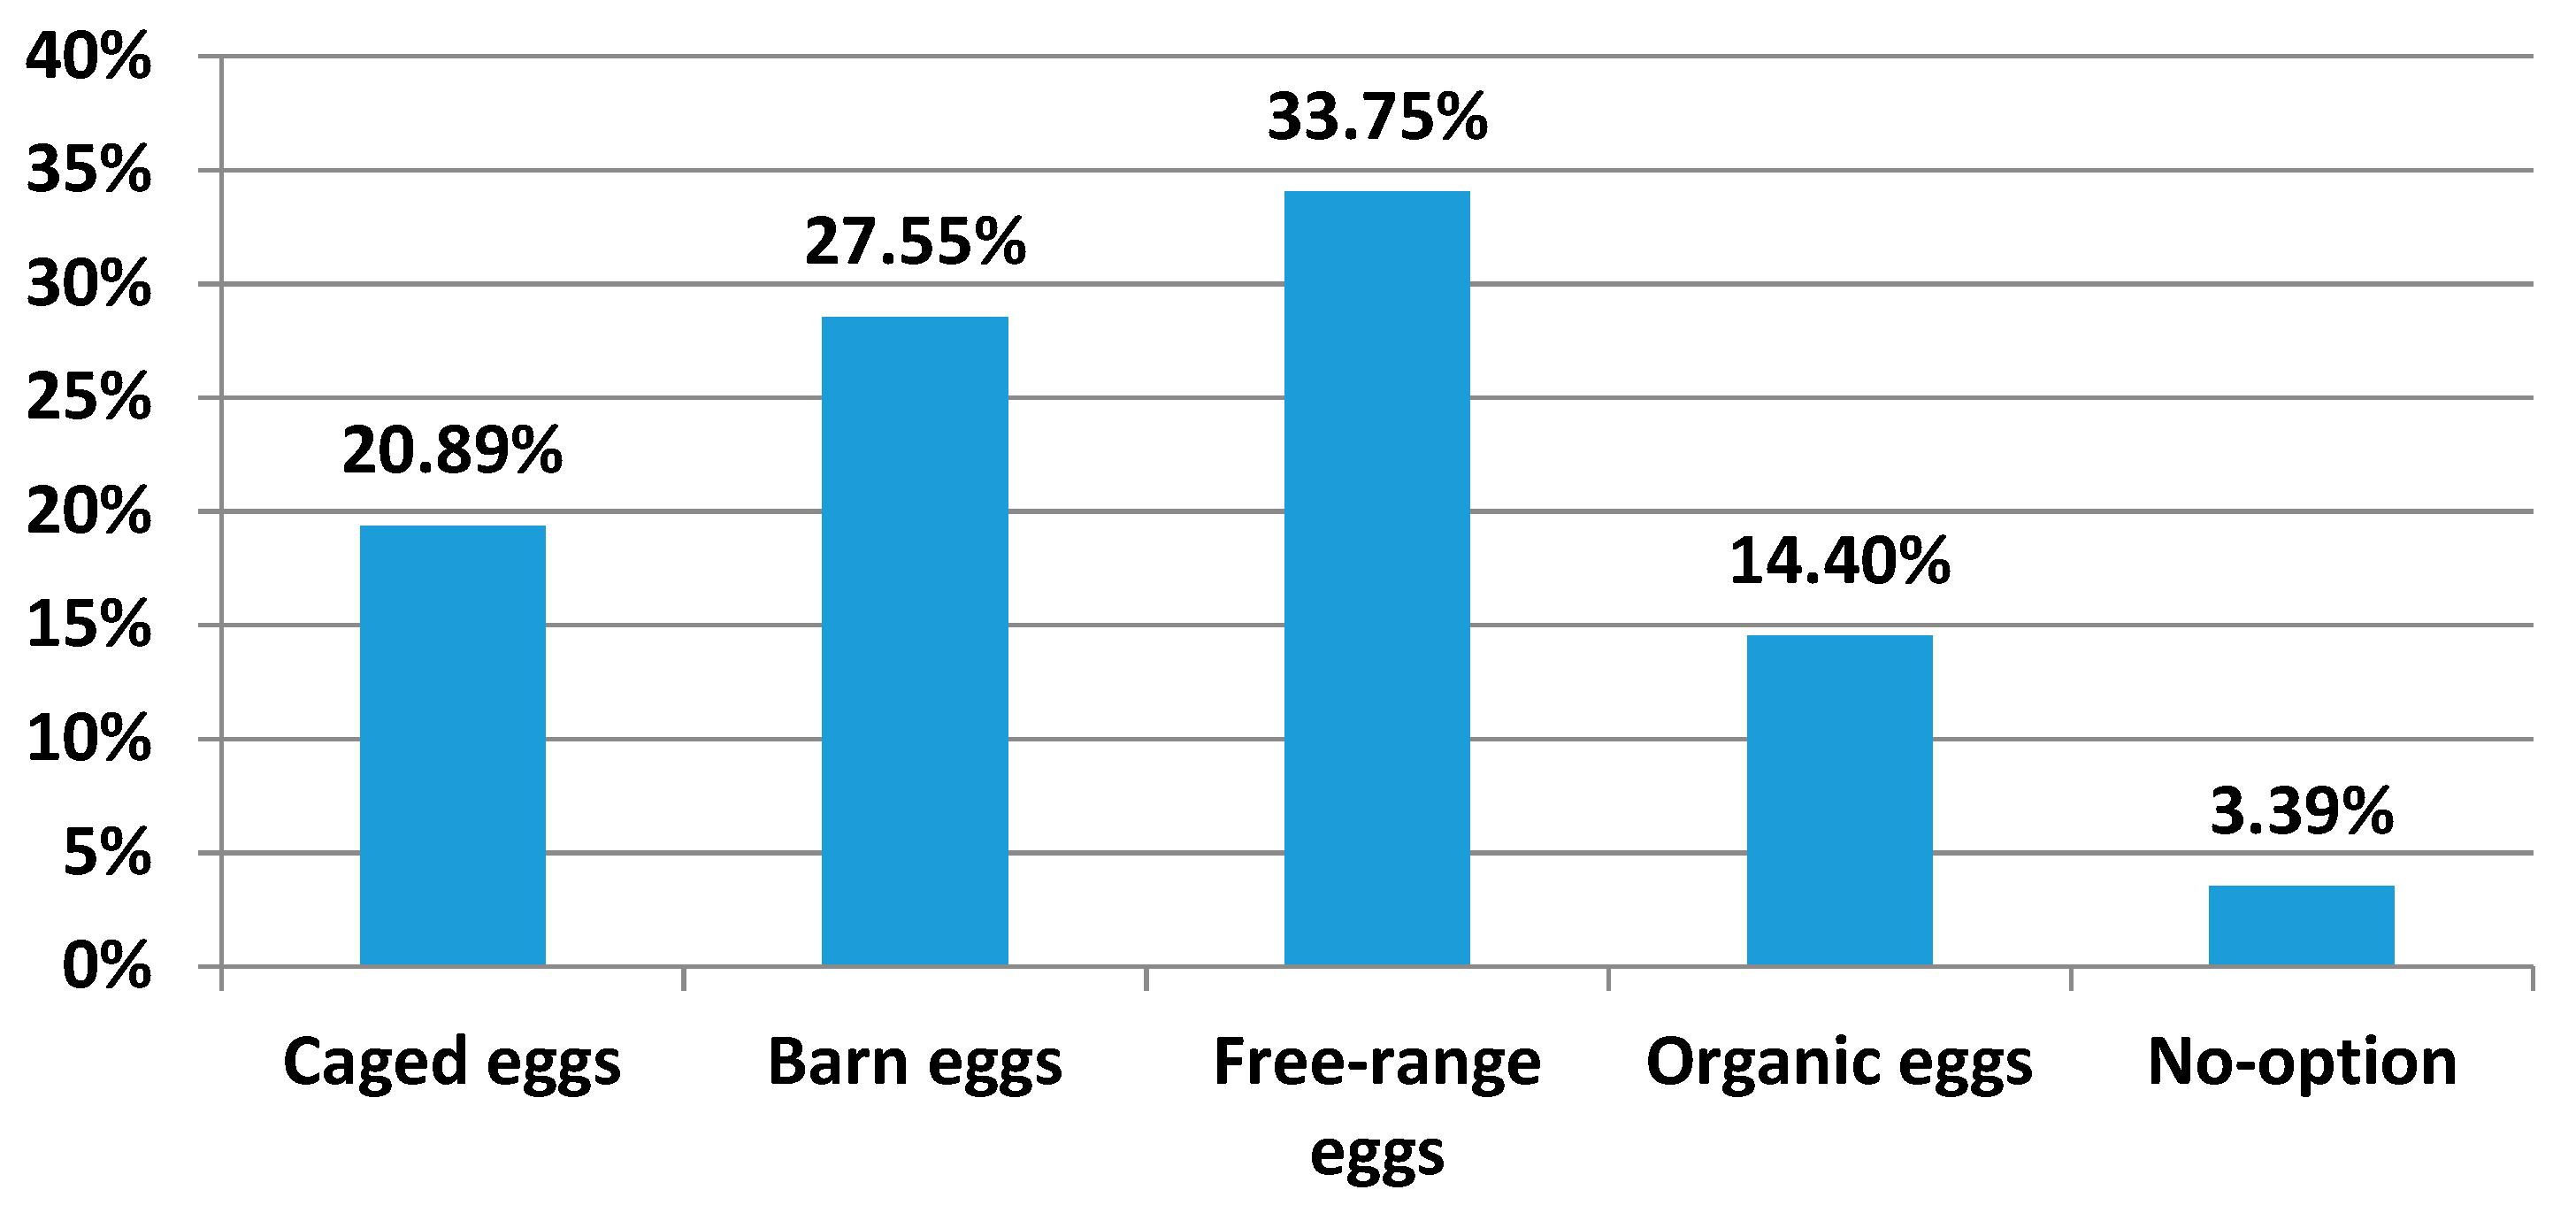 Free range is a con. There's no such thing as an ethical egg